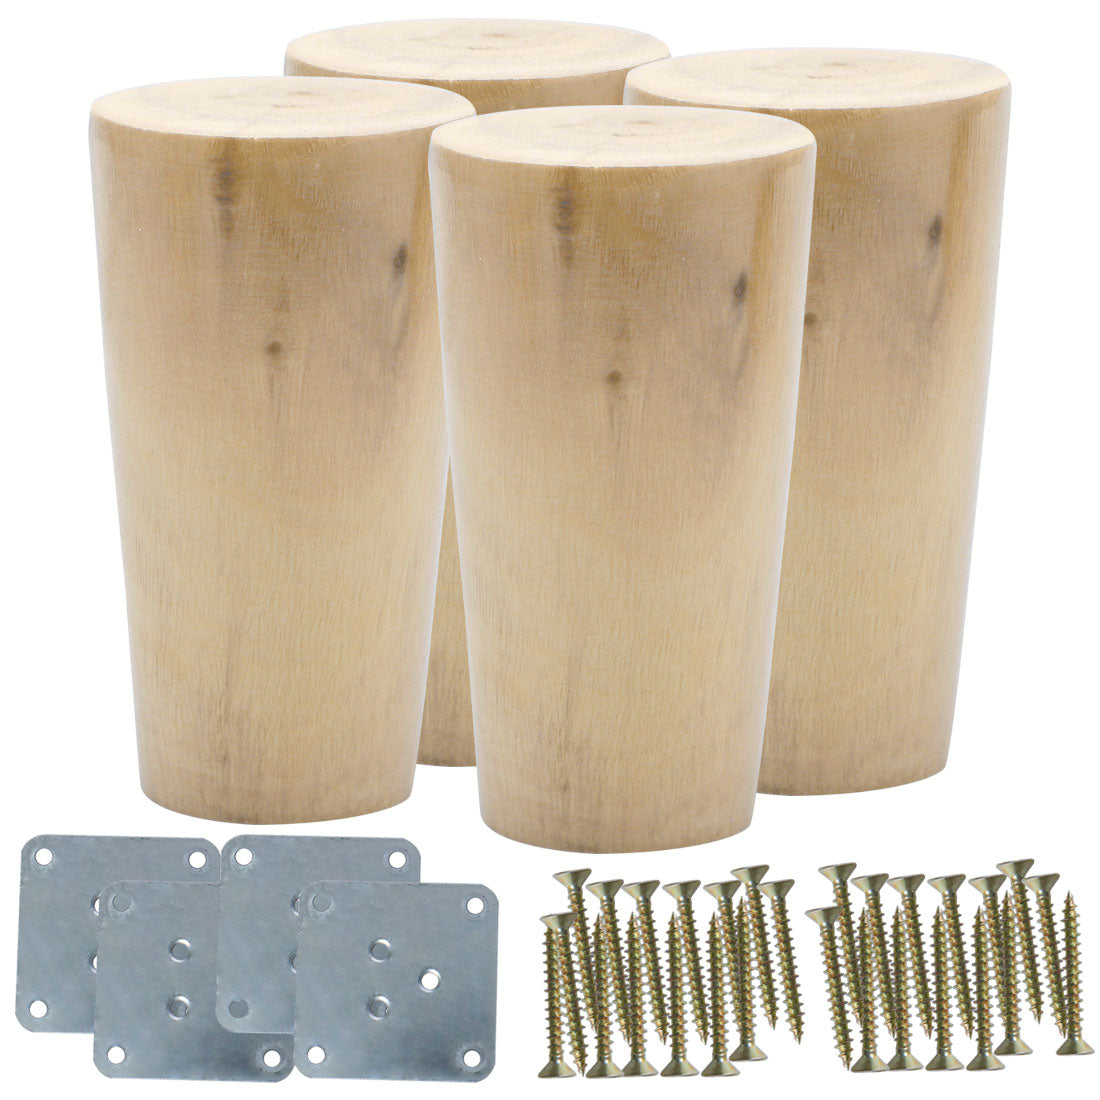 uxcell Uxcell Round Wood Furniture Leg Chair Sofa Feet Replacement Set of 4